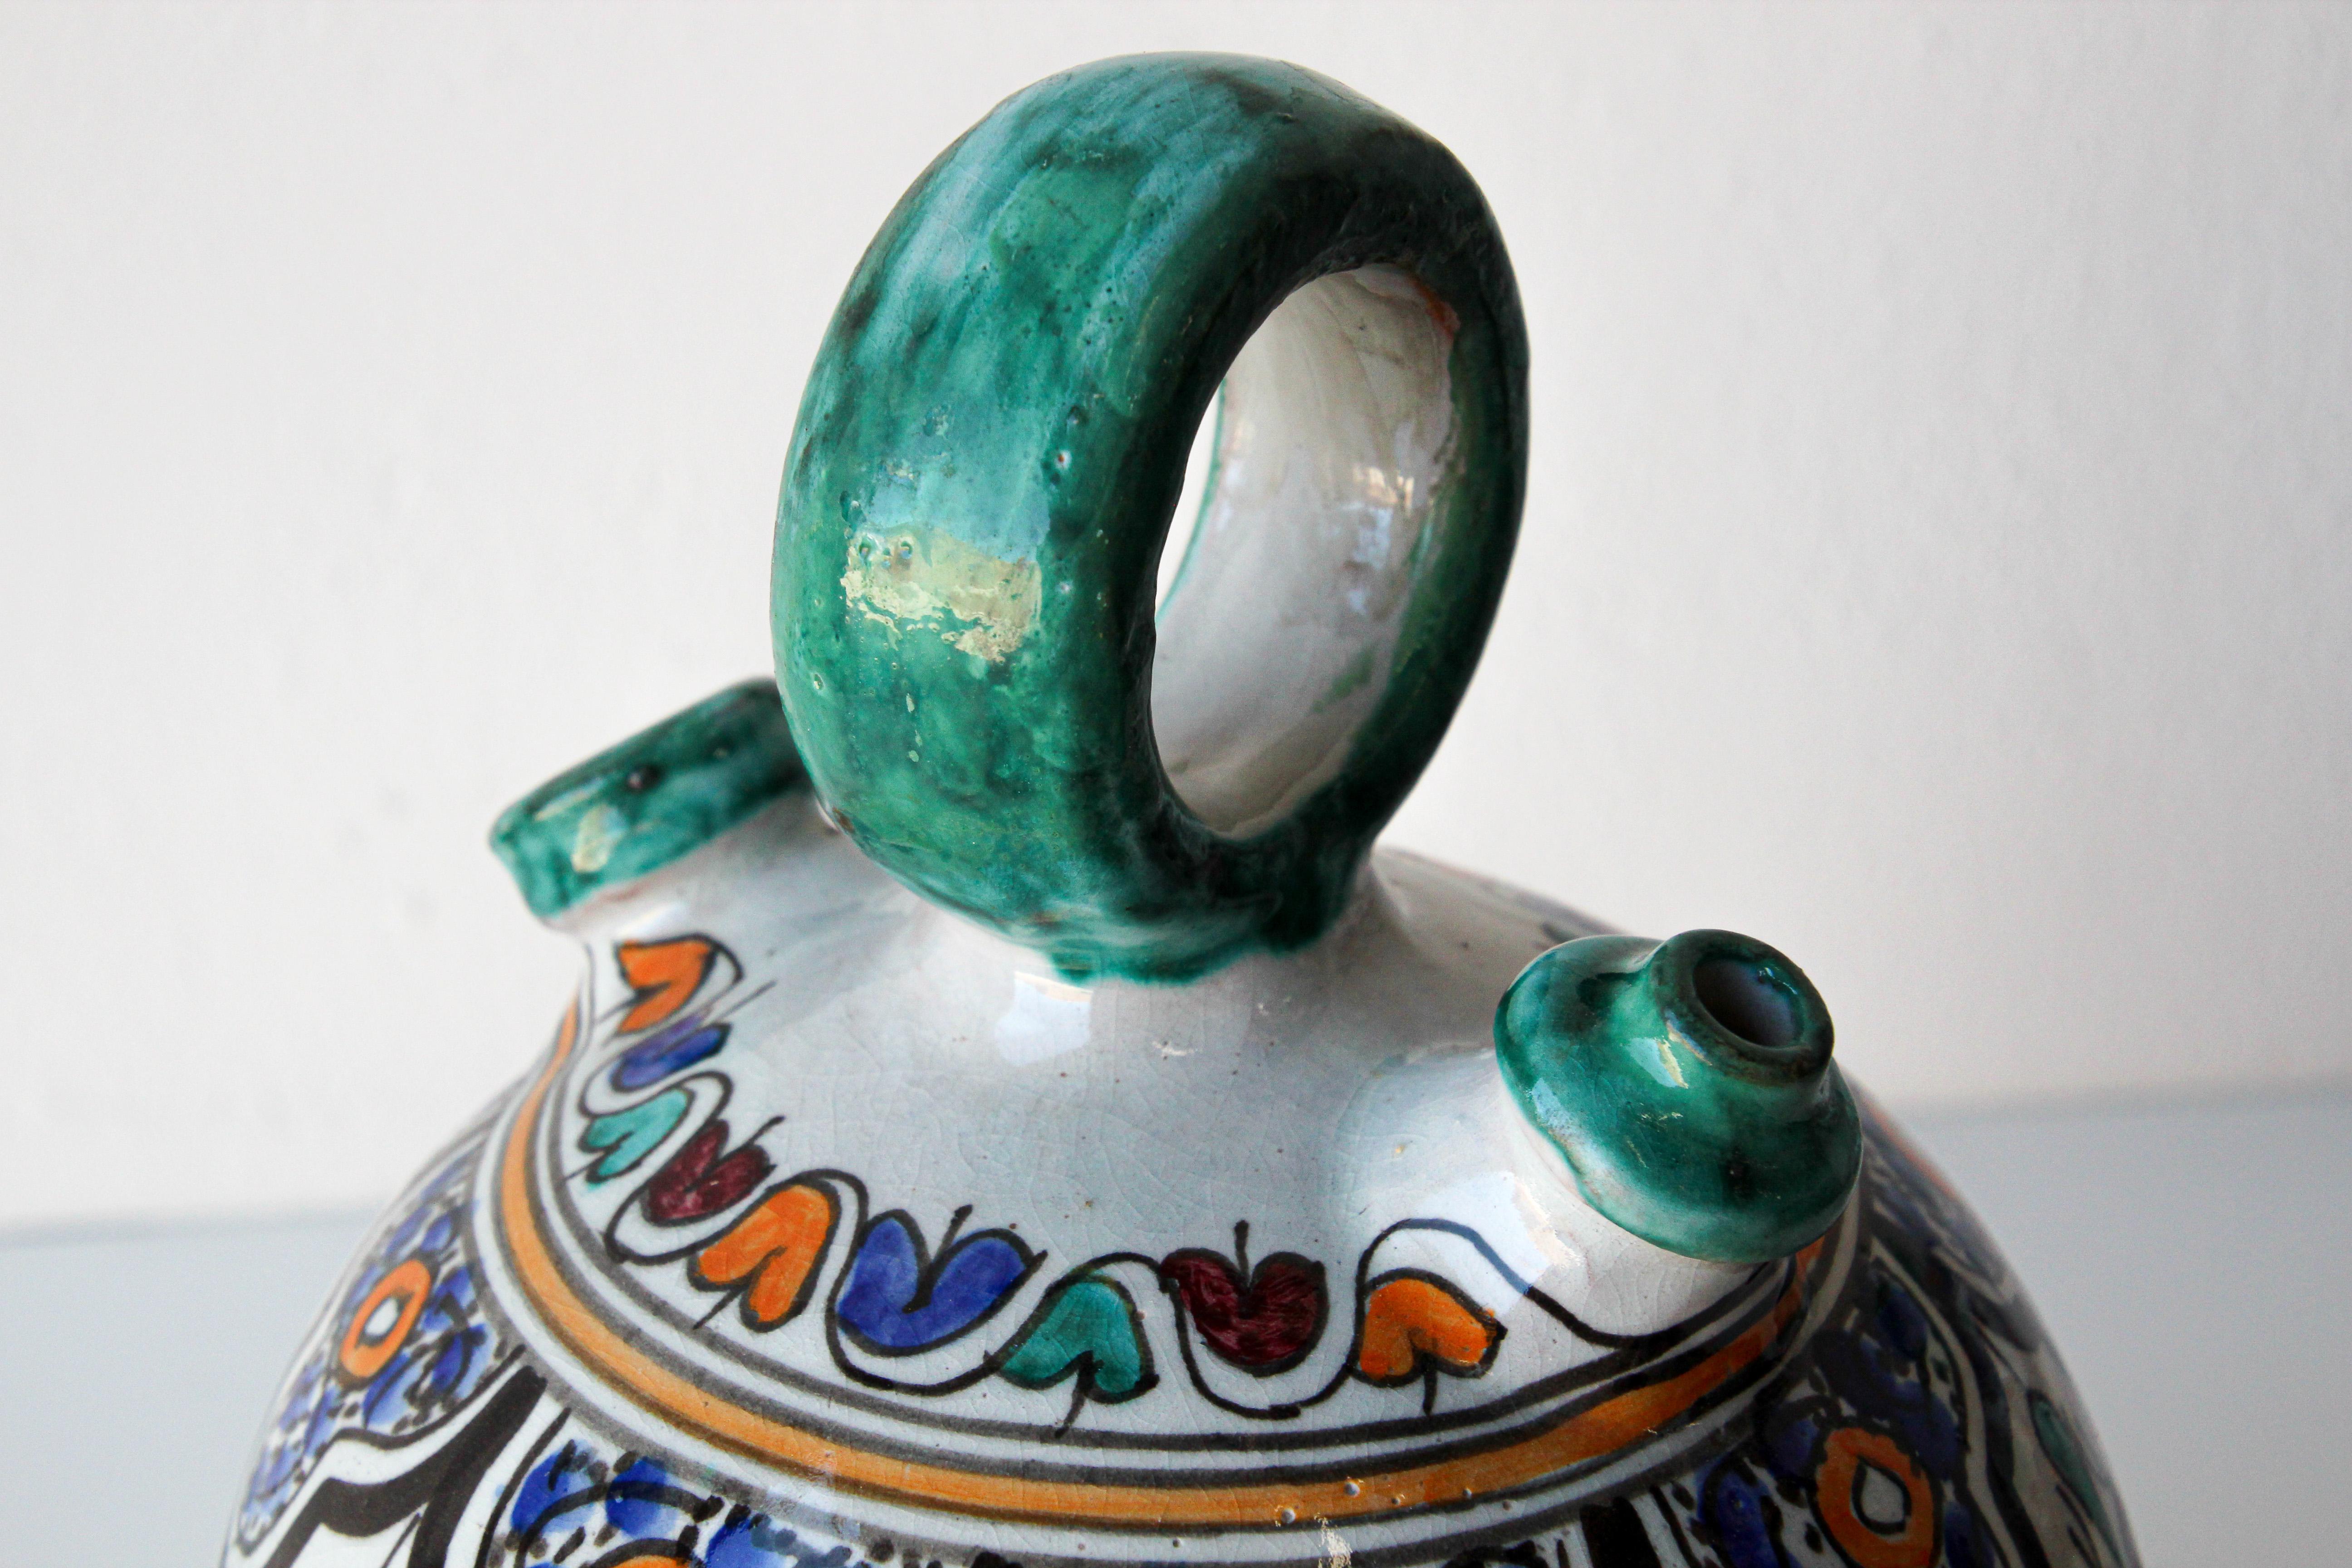 Moorish Ceramic Glazed Water Jug Handcrafted in Fez Morocco For Sale 5